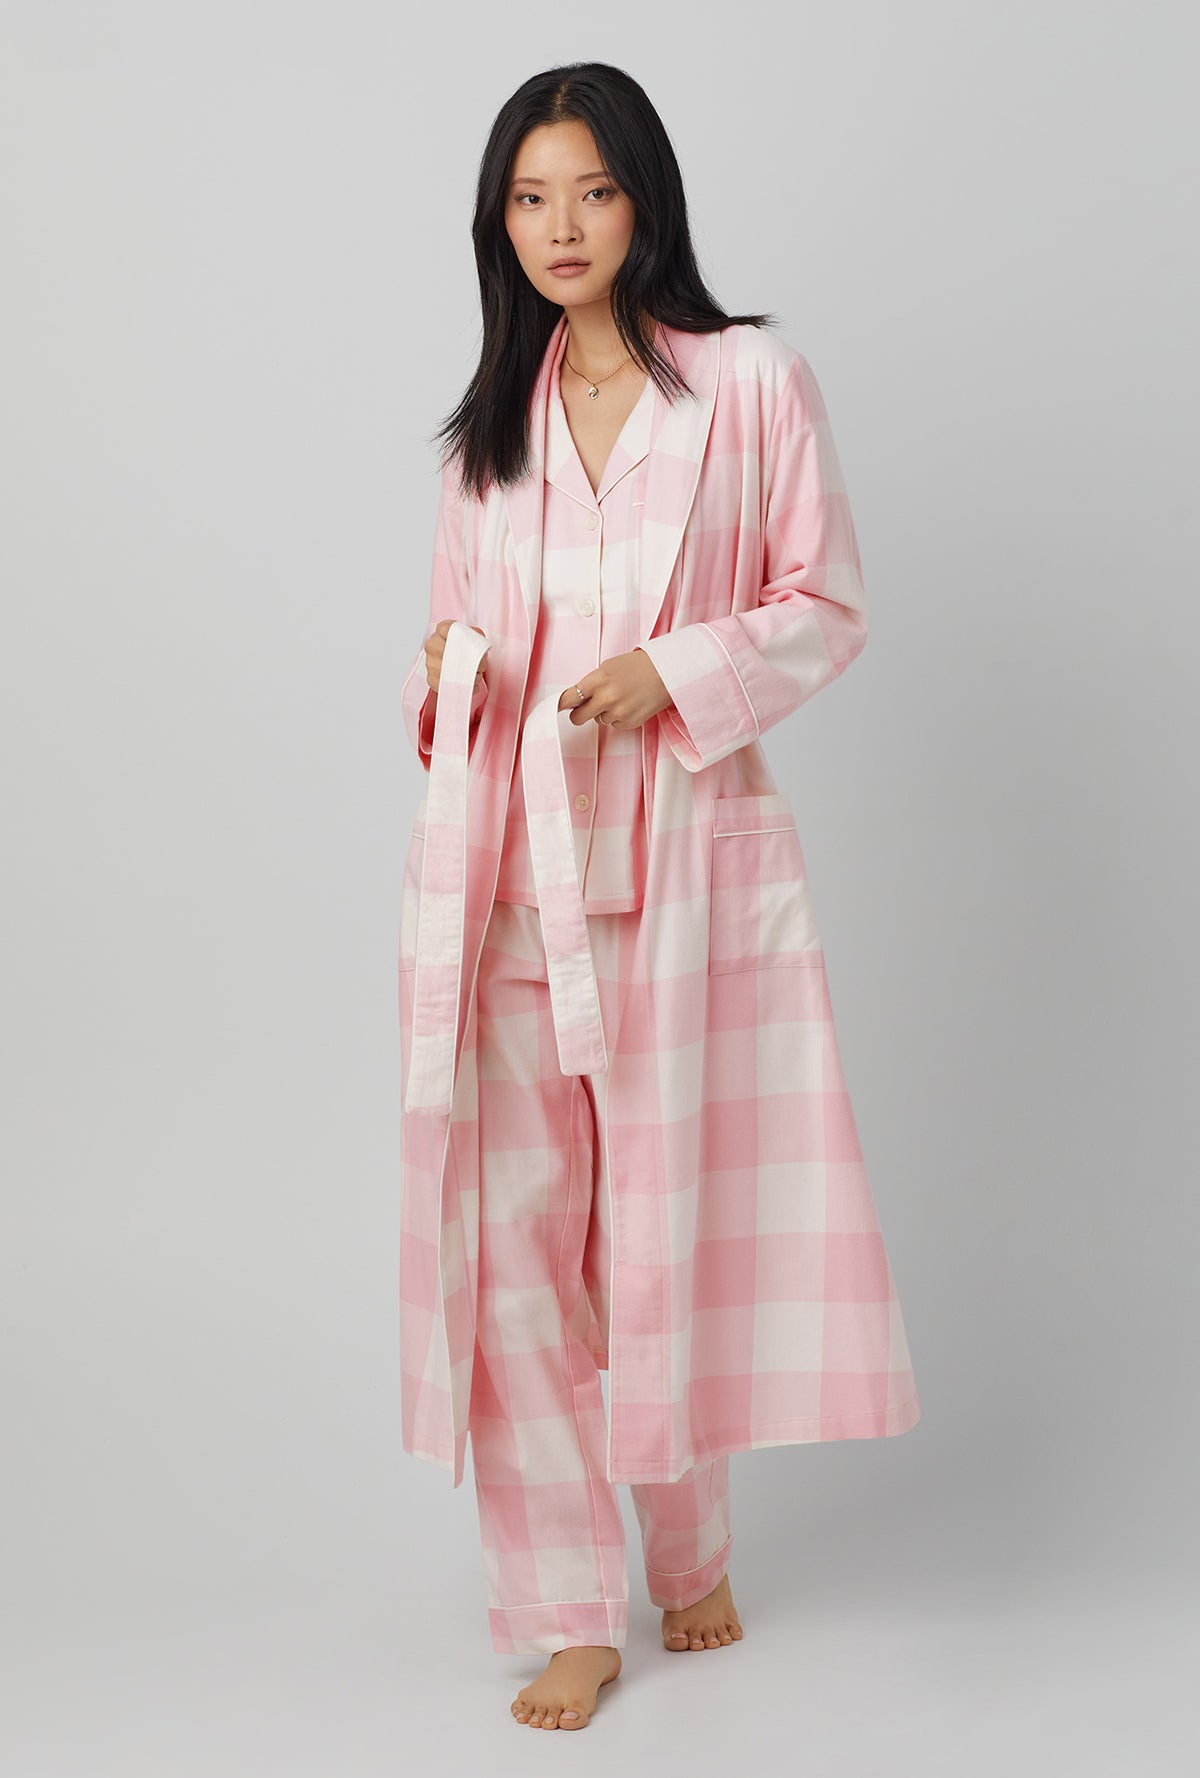 A lady wearing classic woven cotton flannel robe with checking in print